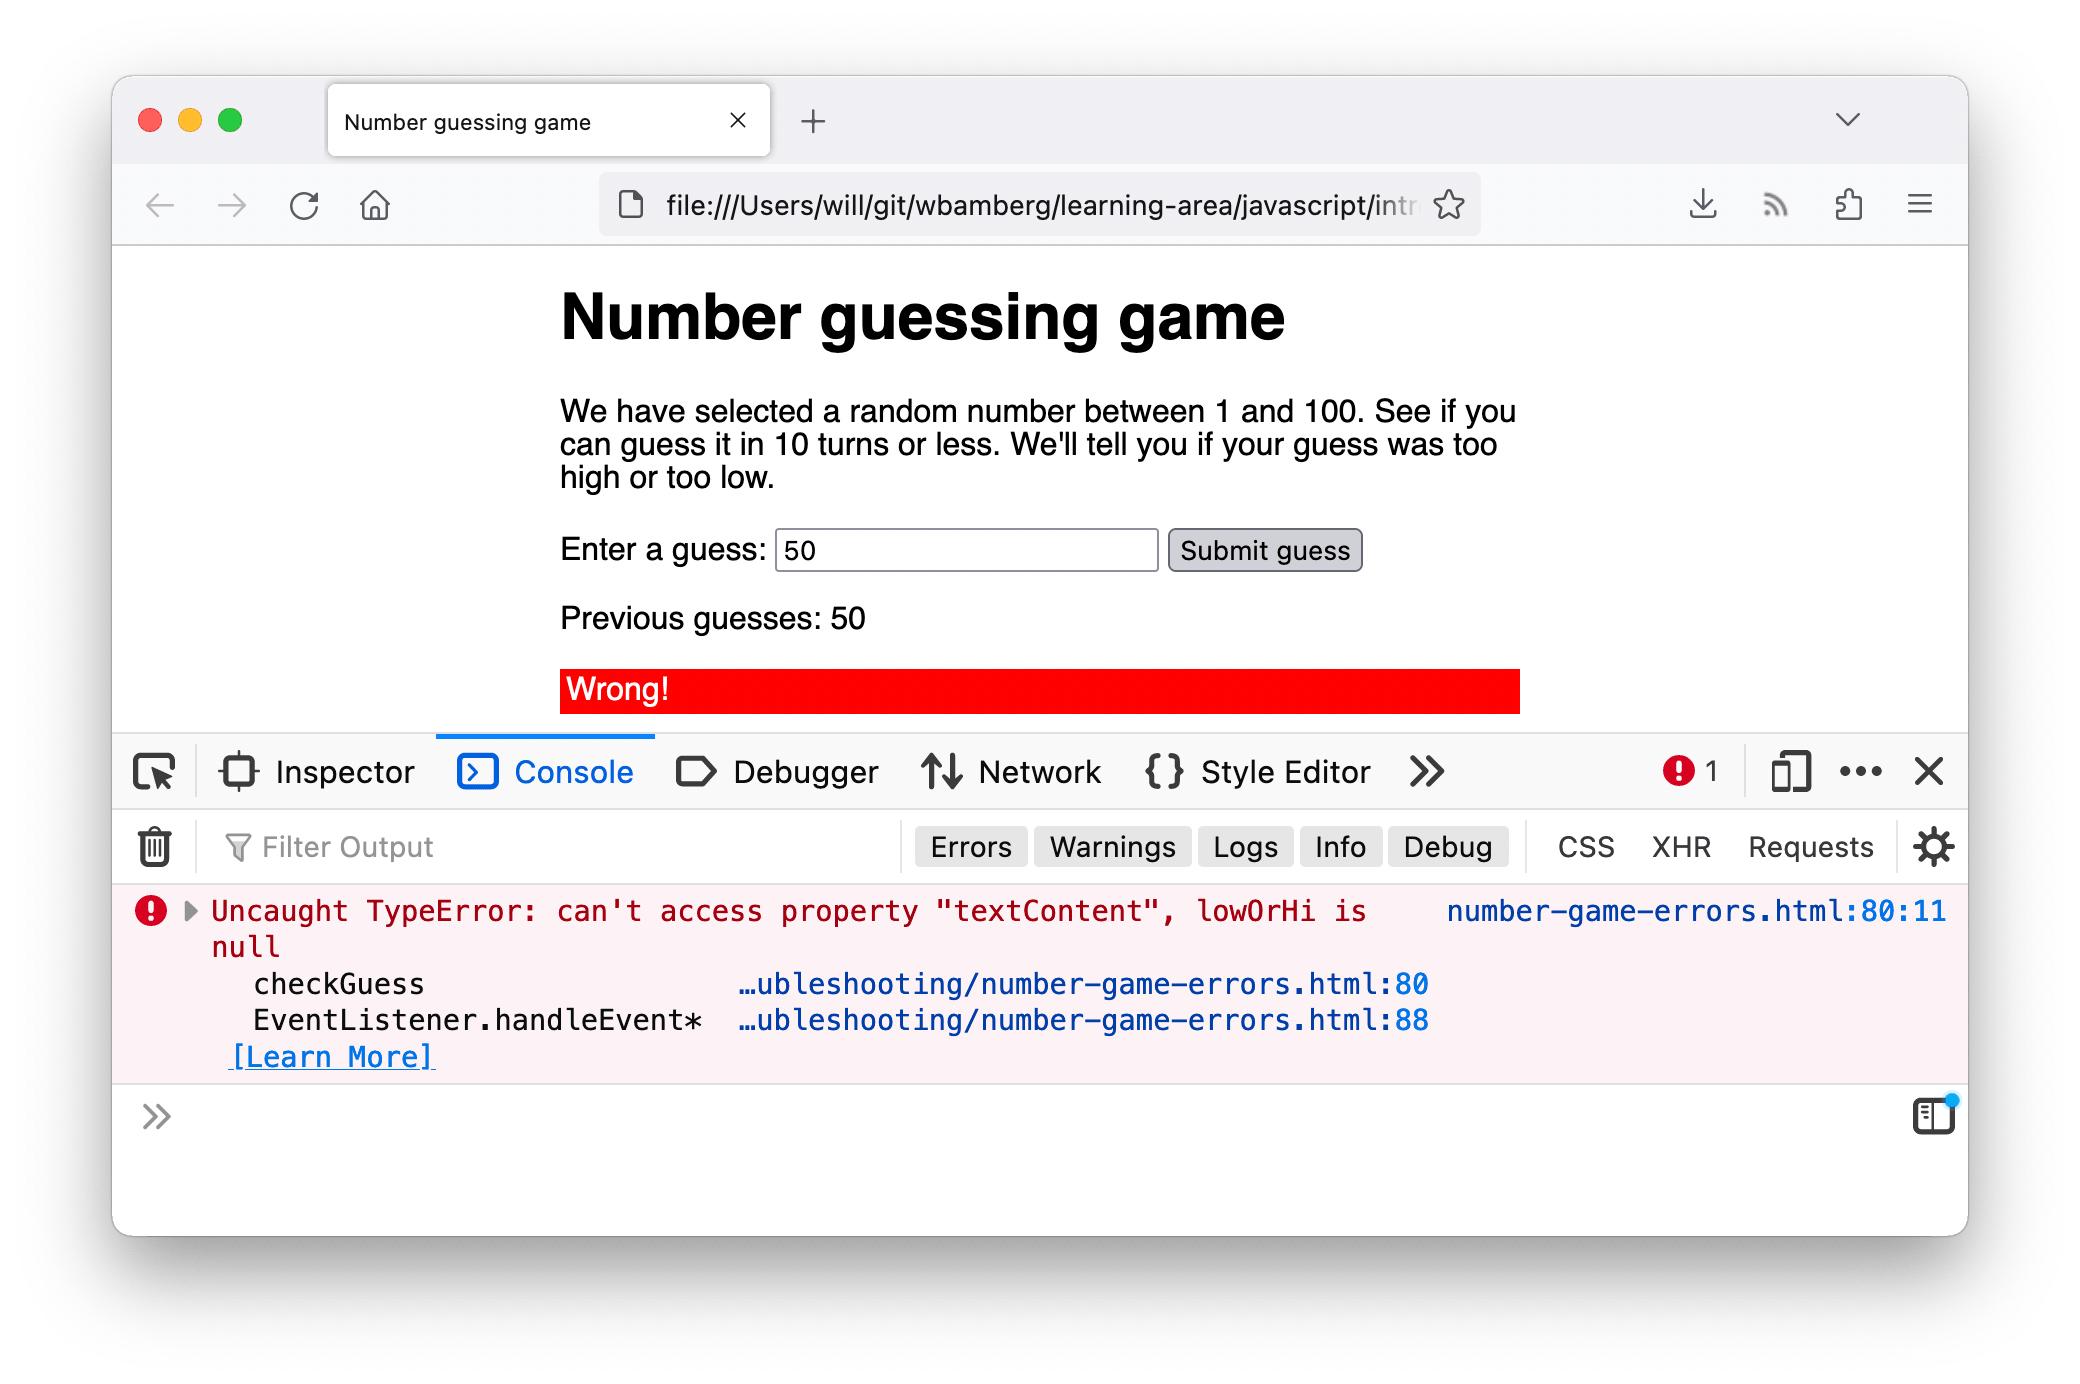 Screenshot of the same "Number guessing game" demo. This time, a different error is visible in the console, reading "X TypeError: lowOrHi is null".